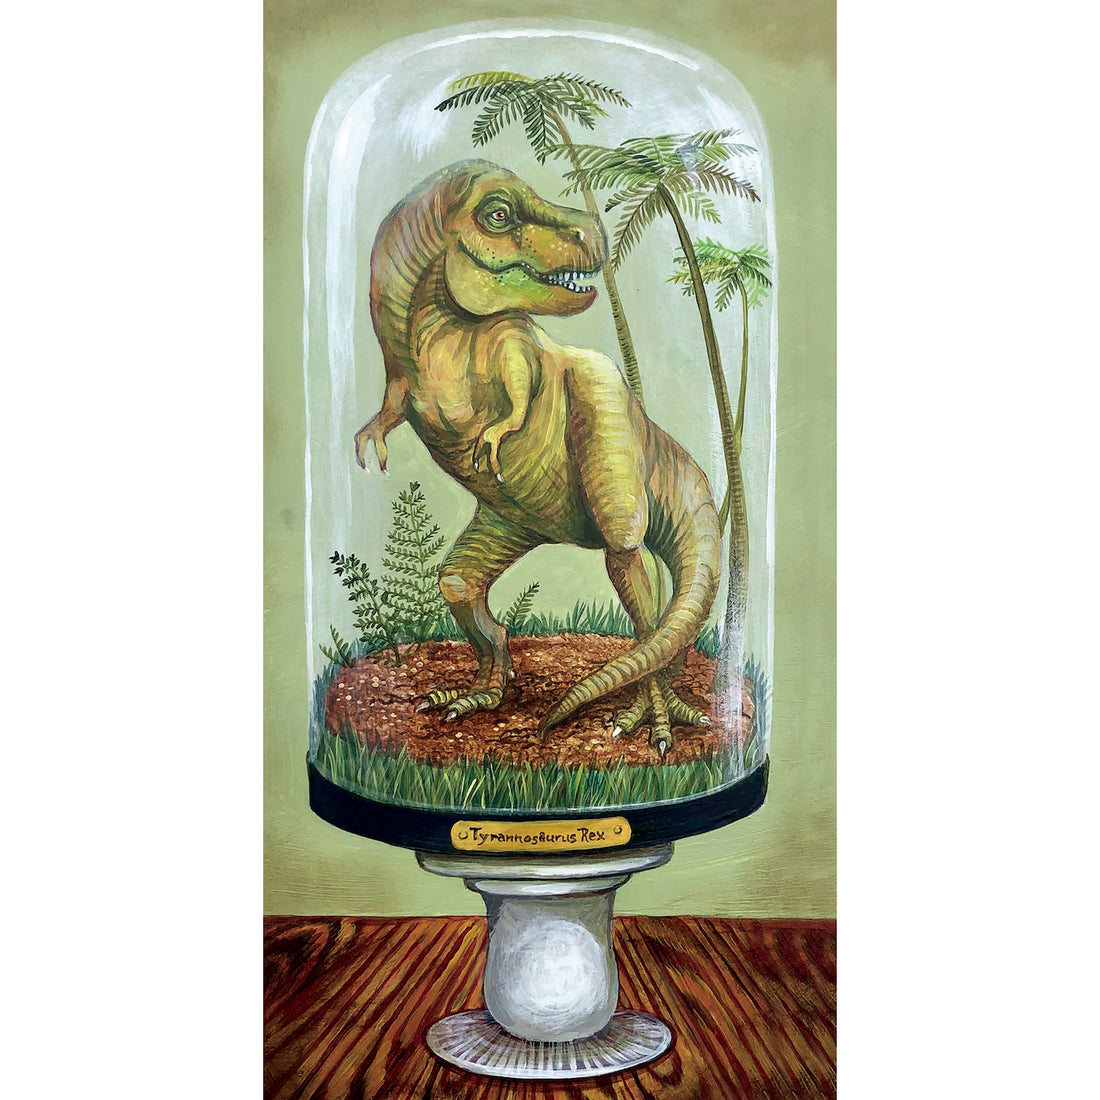 A whimsical illustration of a glass dome on a stand sitting on a table, containing a green t-rex dinosaur among ancient botanicals.